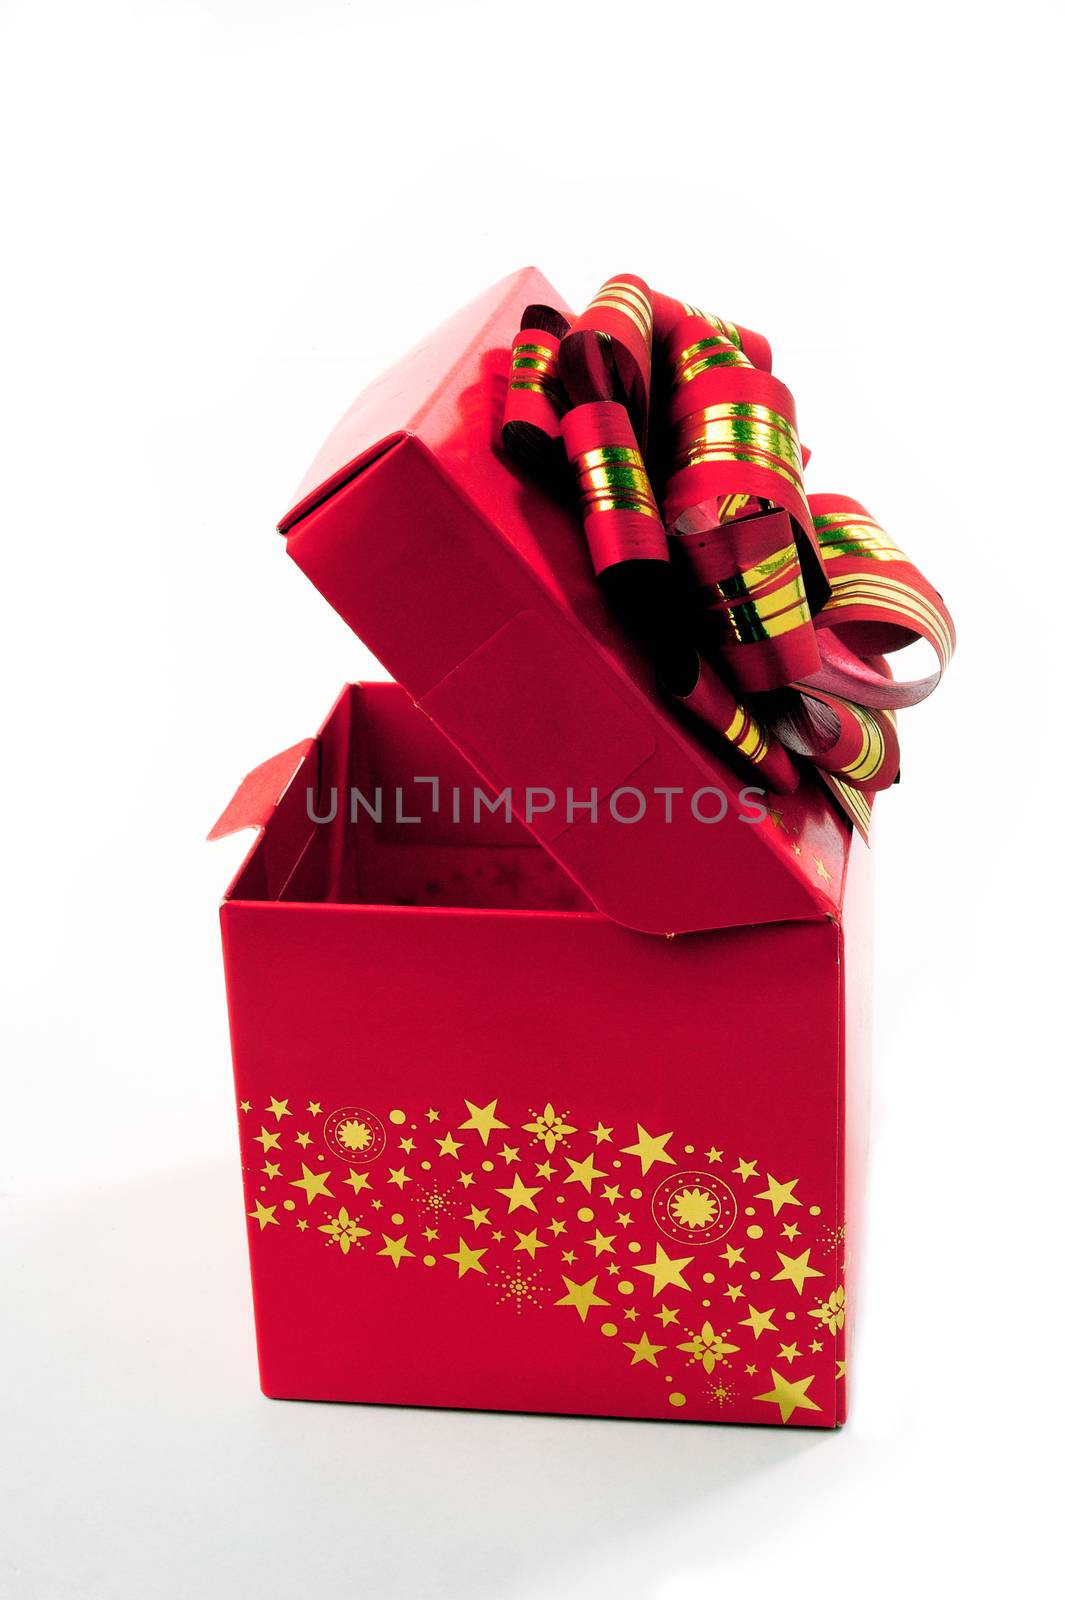 A red gift box with a red bow and gold